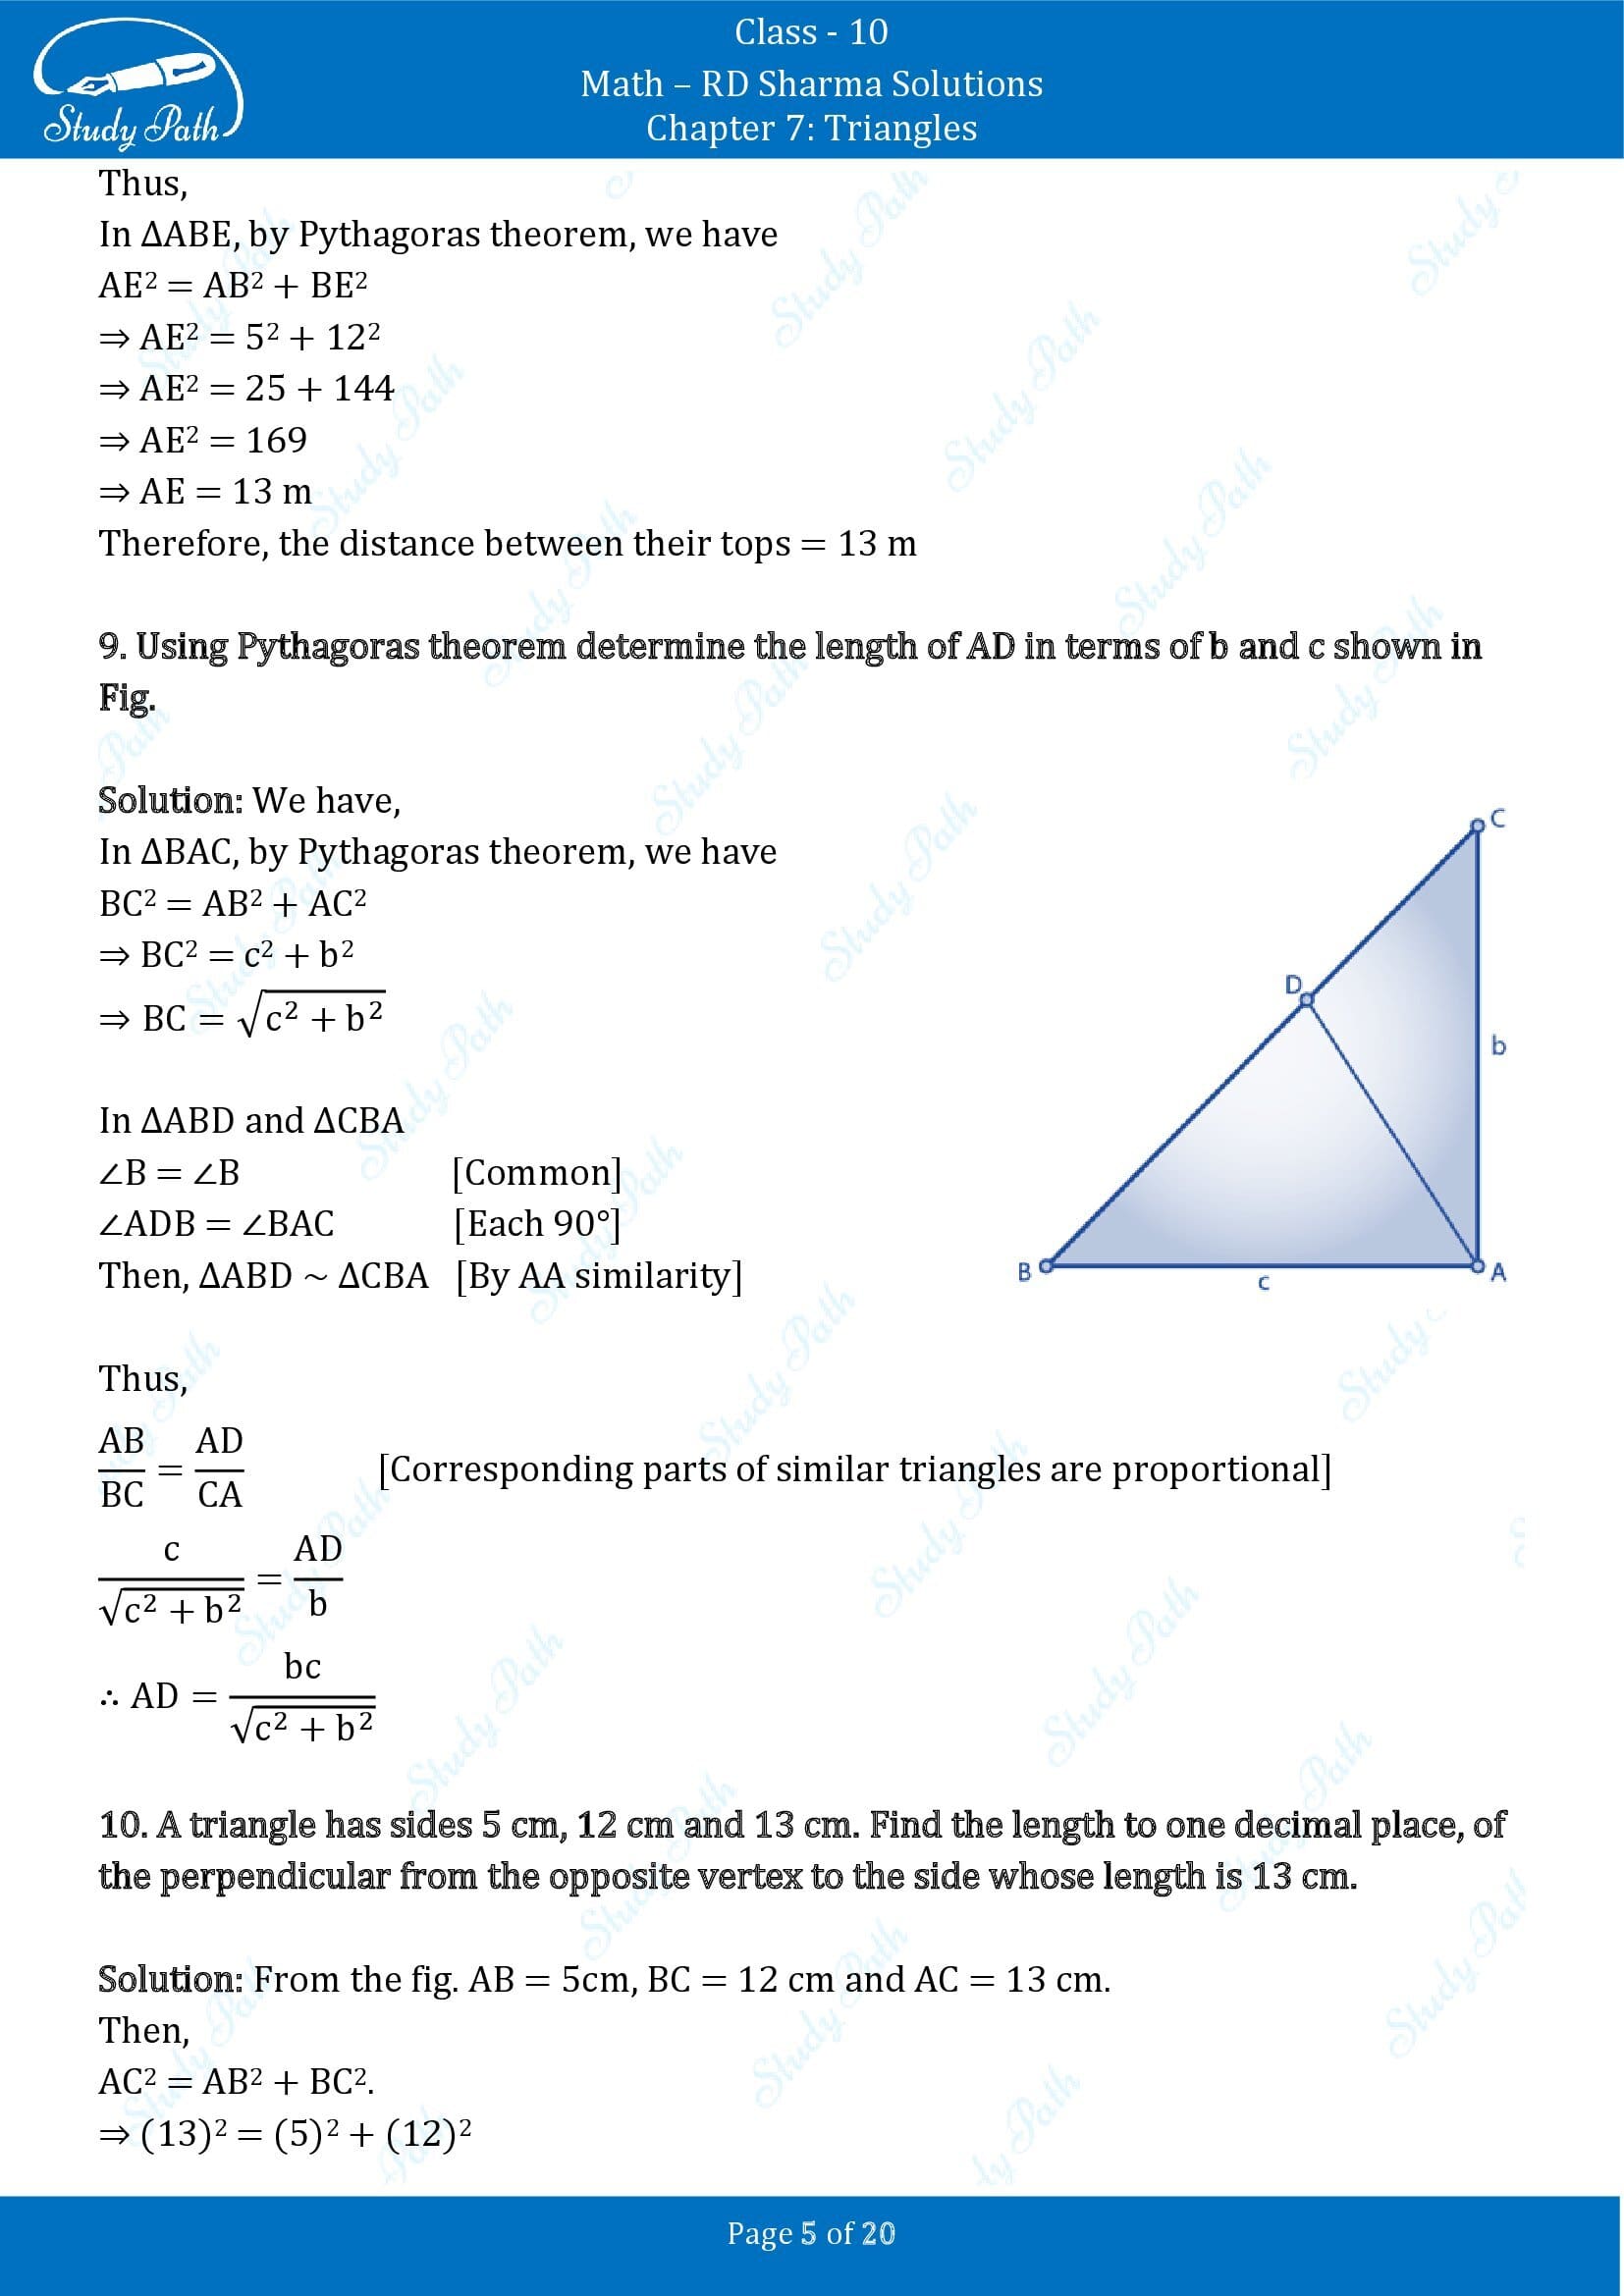 RD Sharma Solutions Class 10 Chapter 7 Triangles Exercise 7.7 00005